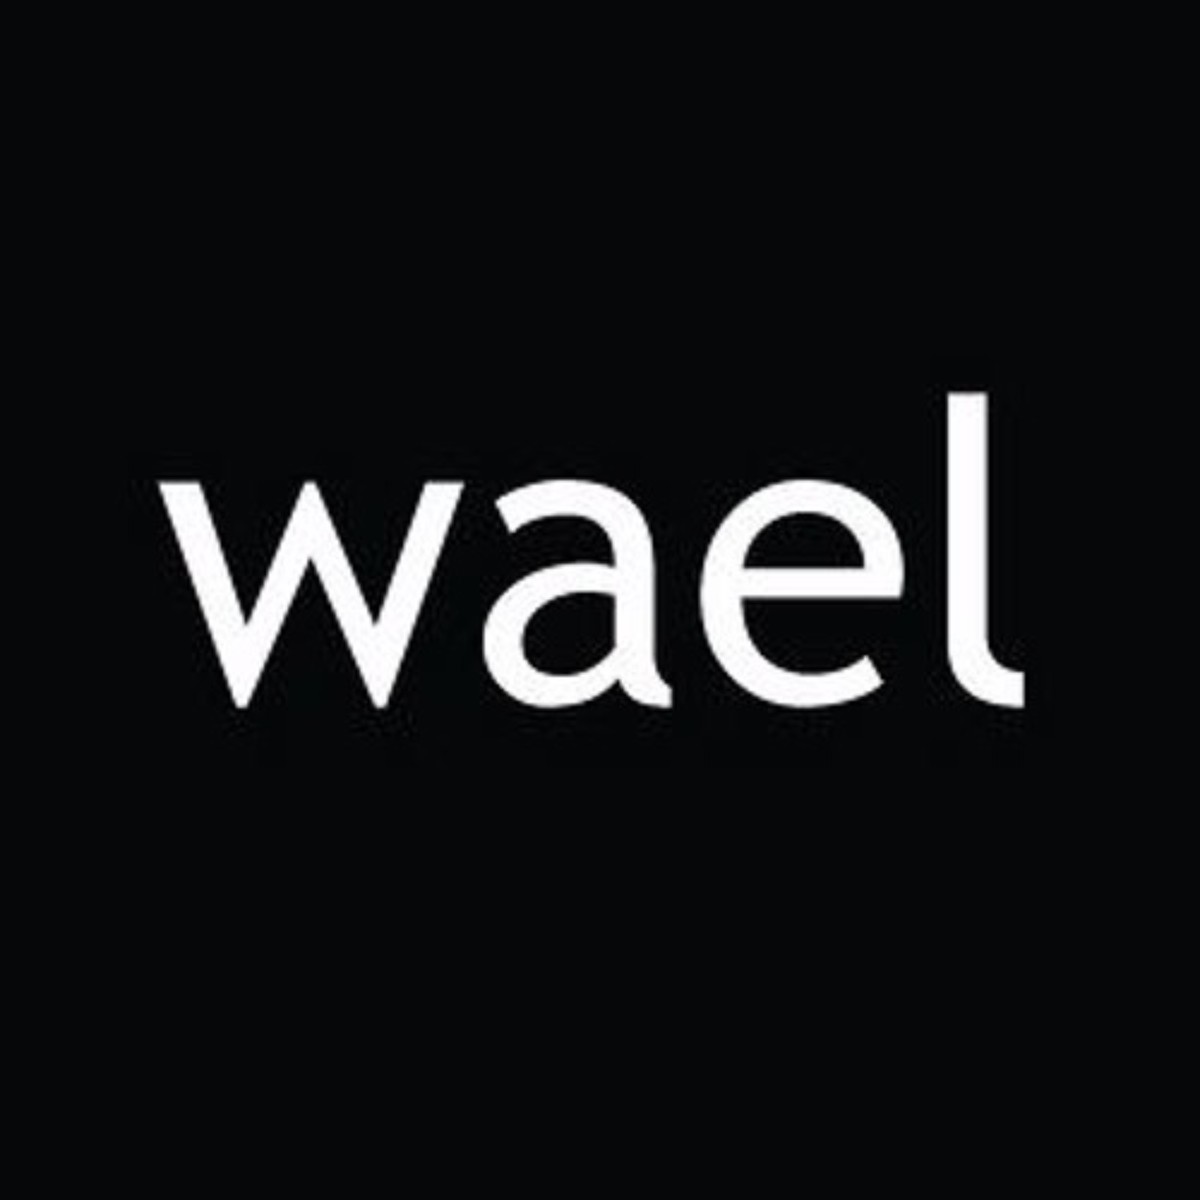 WAEL Oil and Gas 2023 Recruitment for Graduates and Experienced Professionals